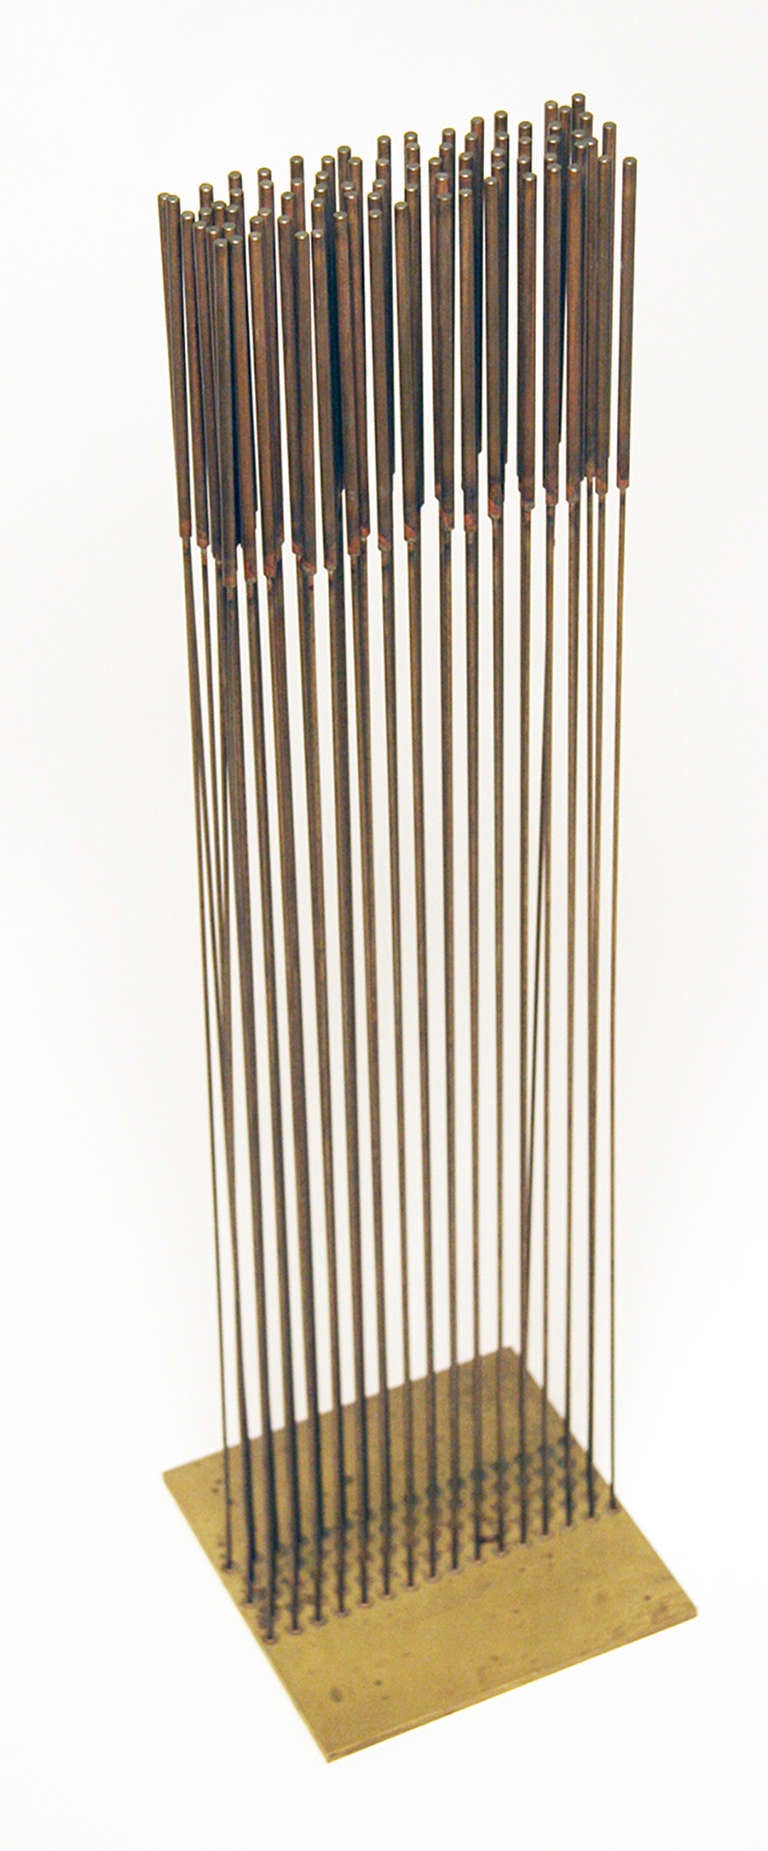 Sound sculptures were the main focus of Bertoia's work in the 1970's.  This is one of his classic forms with beryllium copper rods soldered into a brass base in rows of sixteen rods wide and 5 rods deep.  It has wonderful sounding quality and the